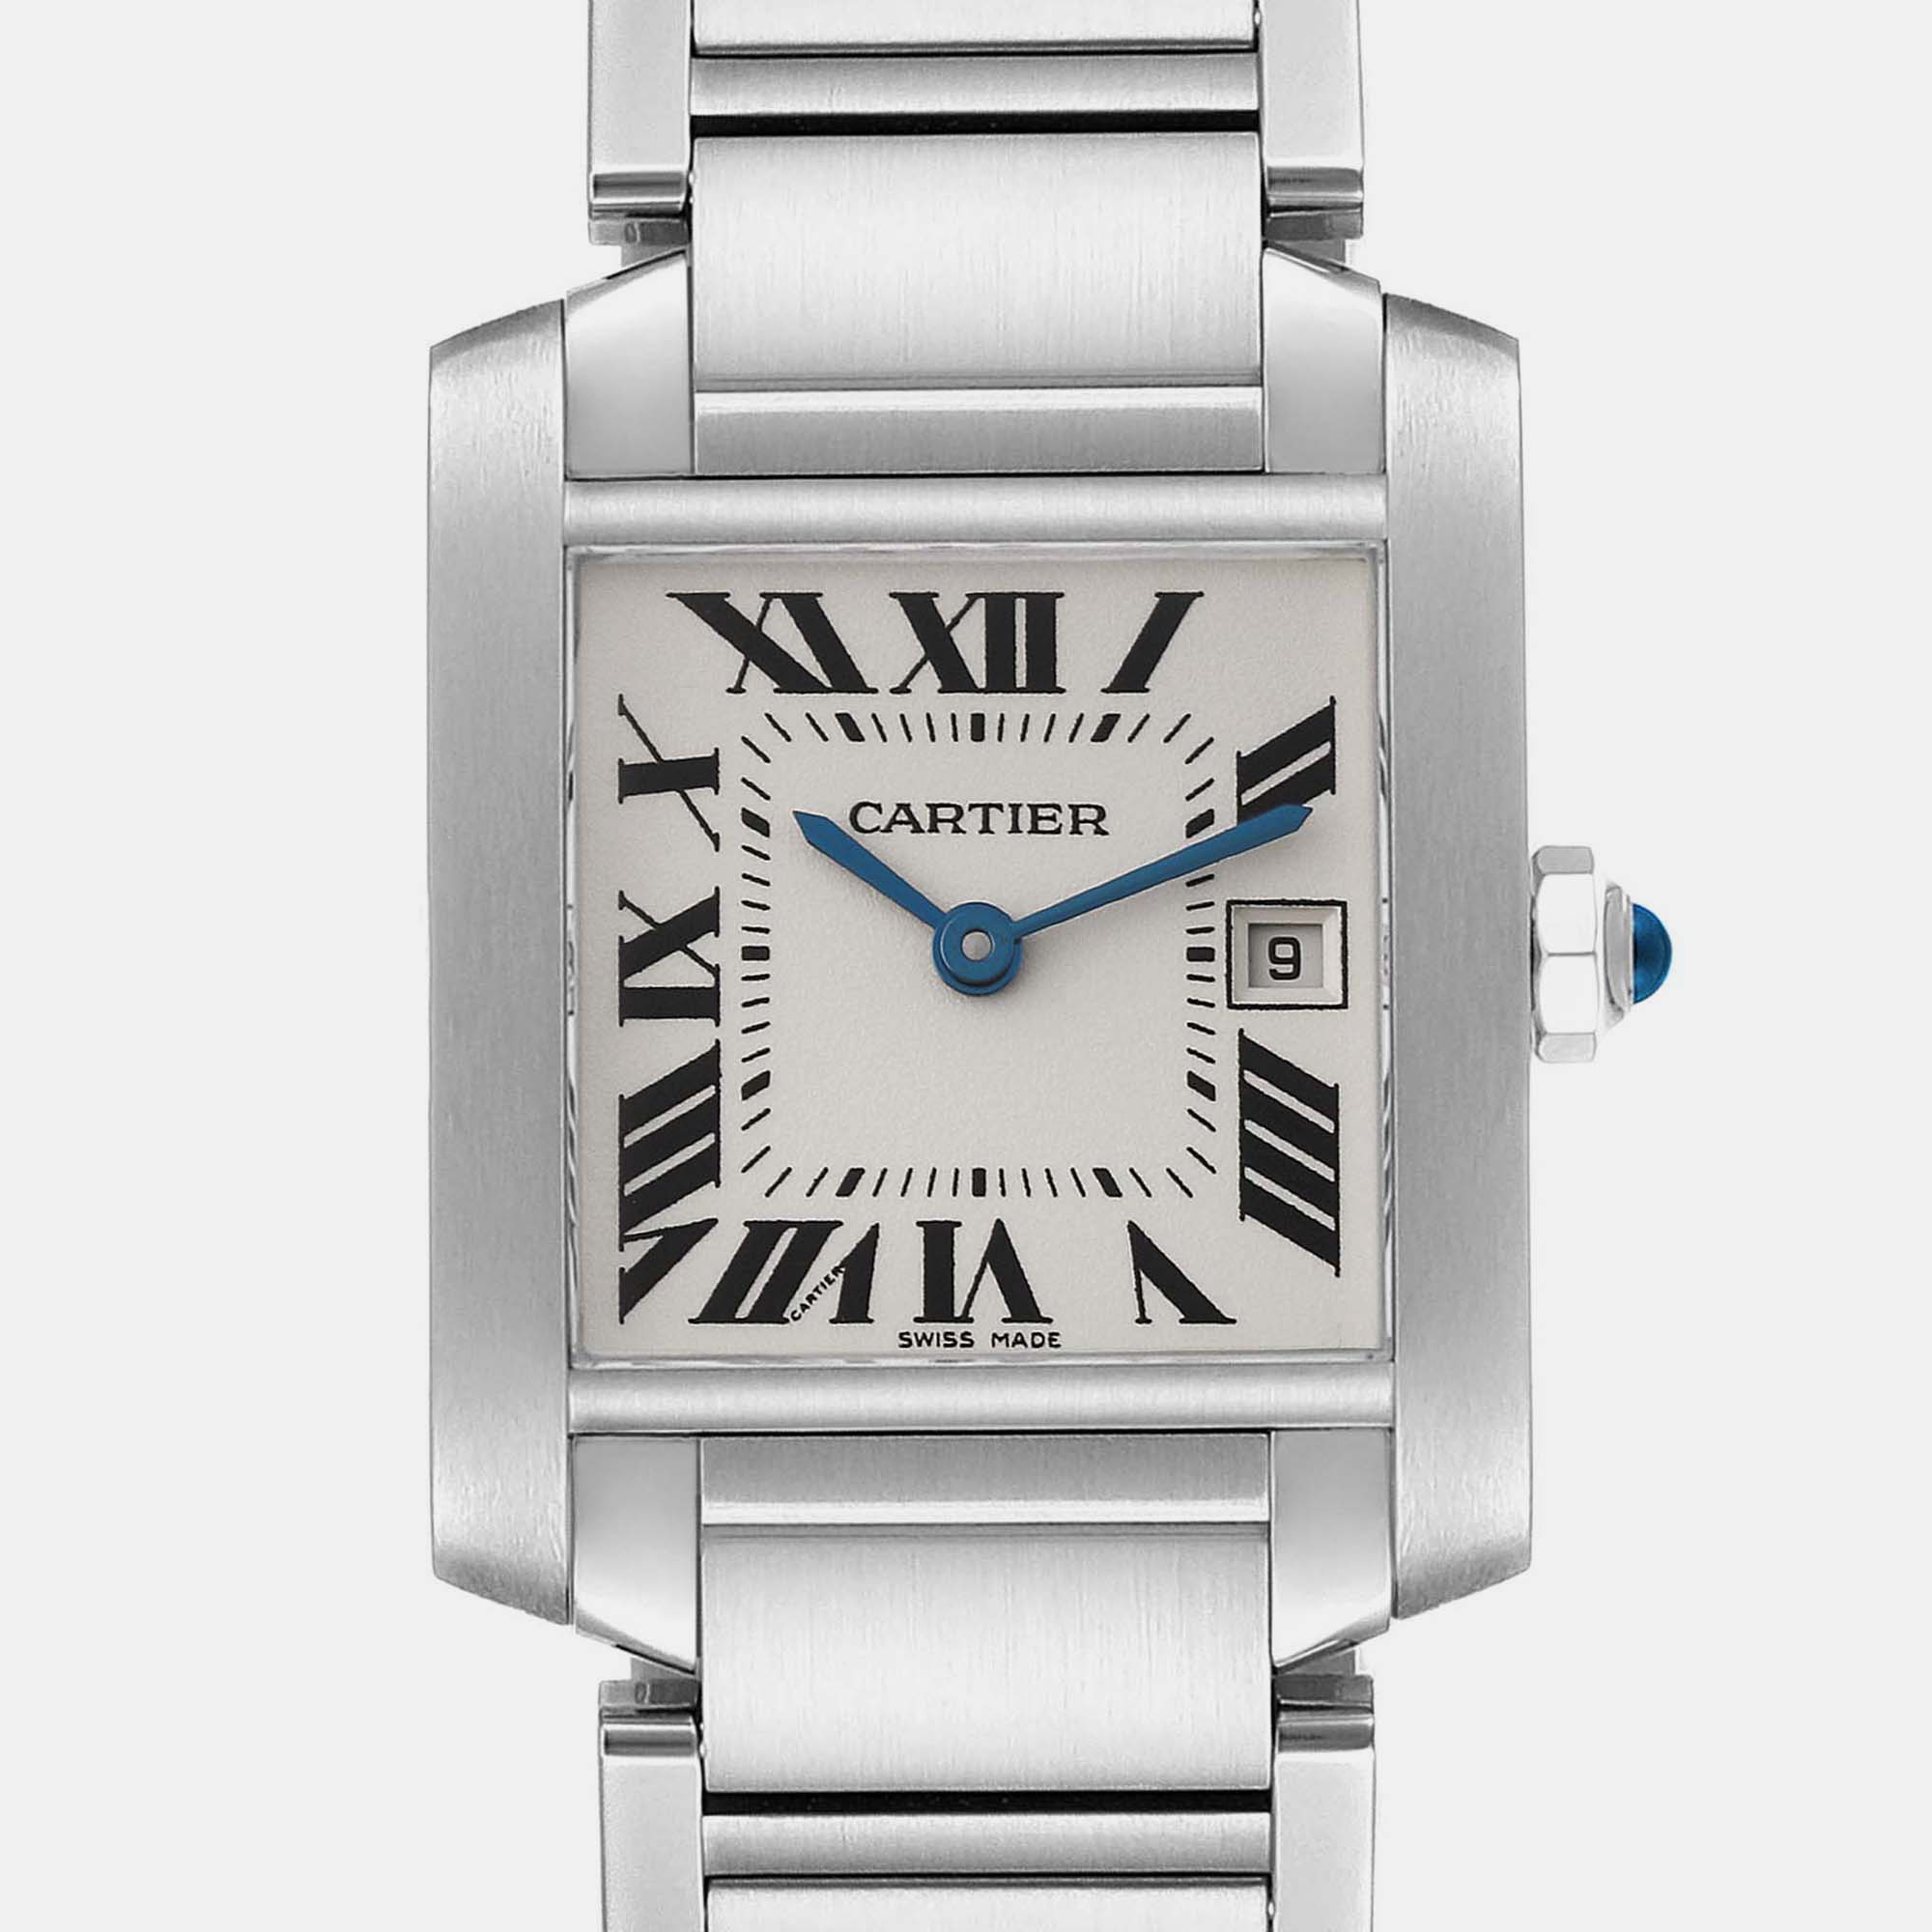 Cartier Tank Francaise Midsize Silver Dial Steel Ladies Watch W51011Q3 25.0 Mm X 30.0 Mm